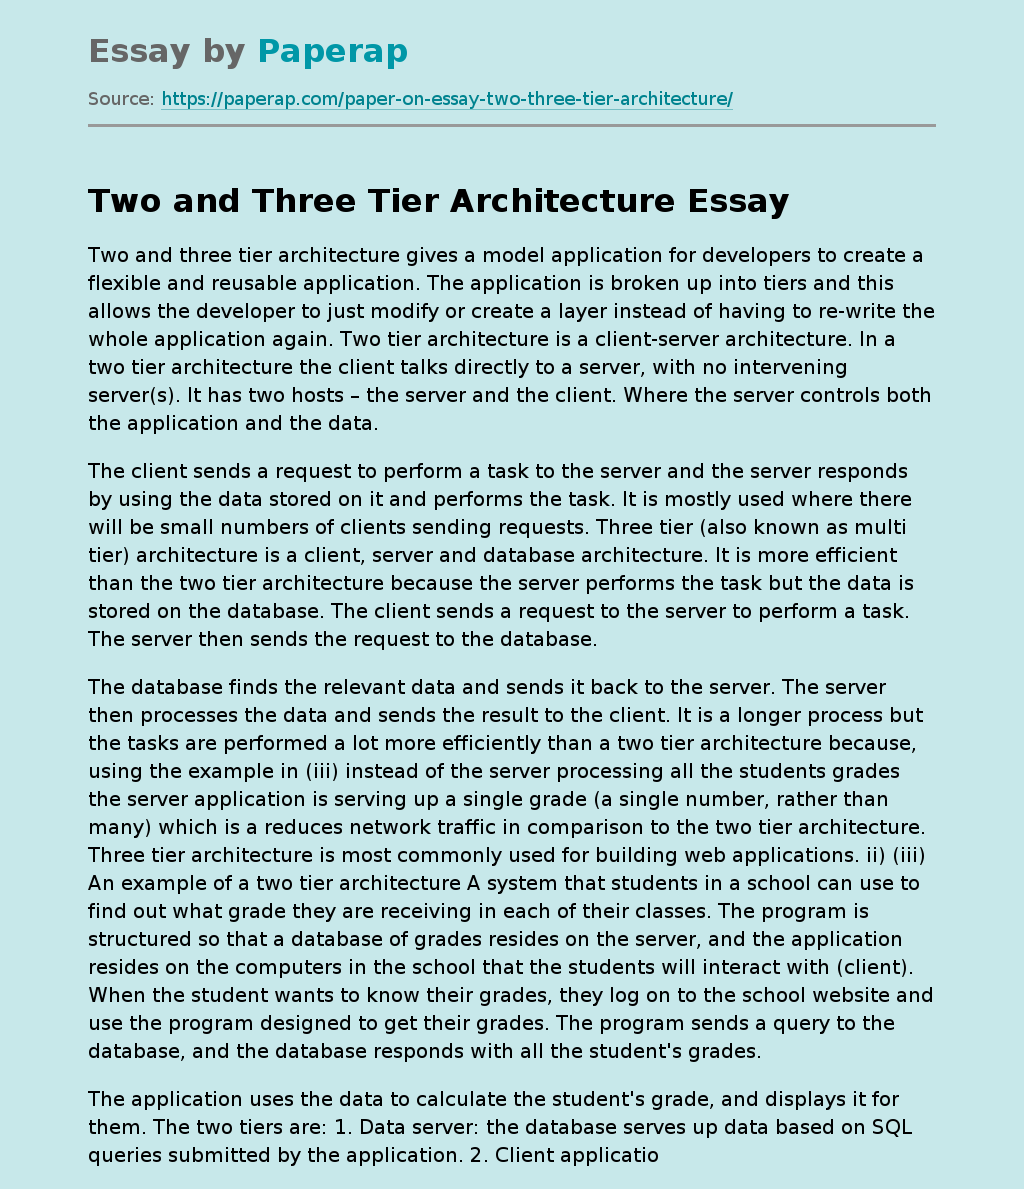 Two and Three Tier Architecture